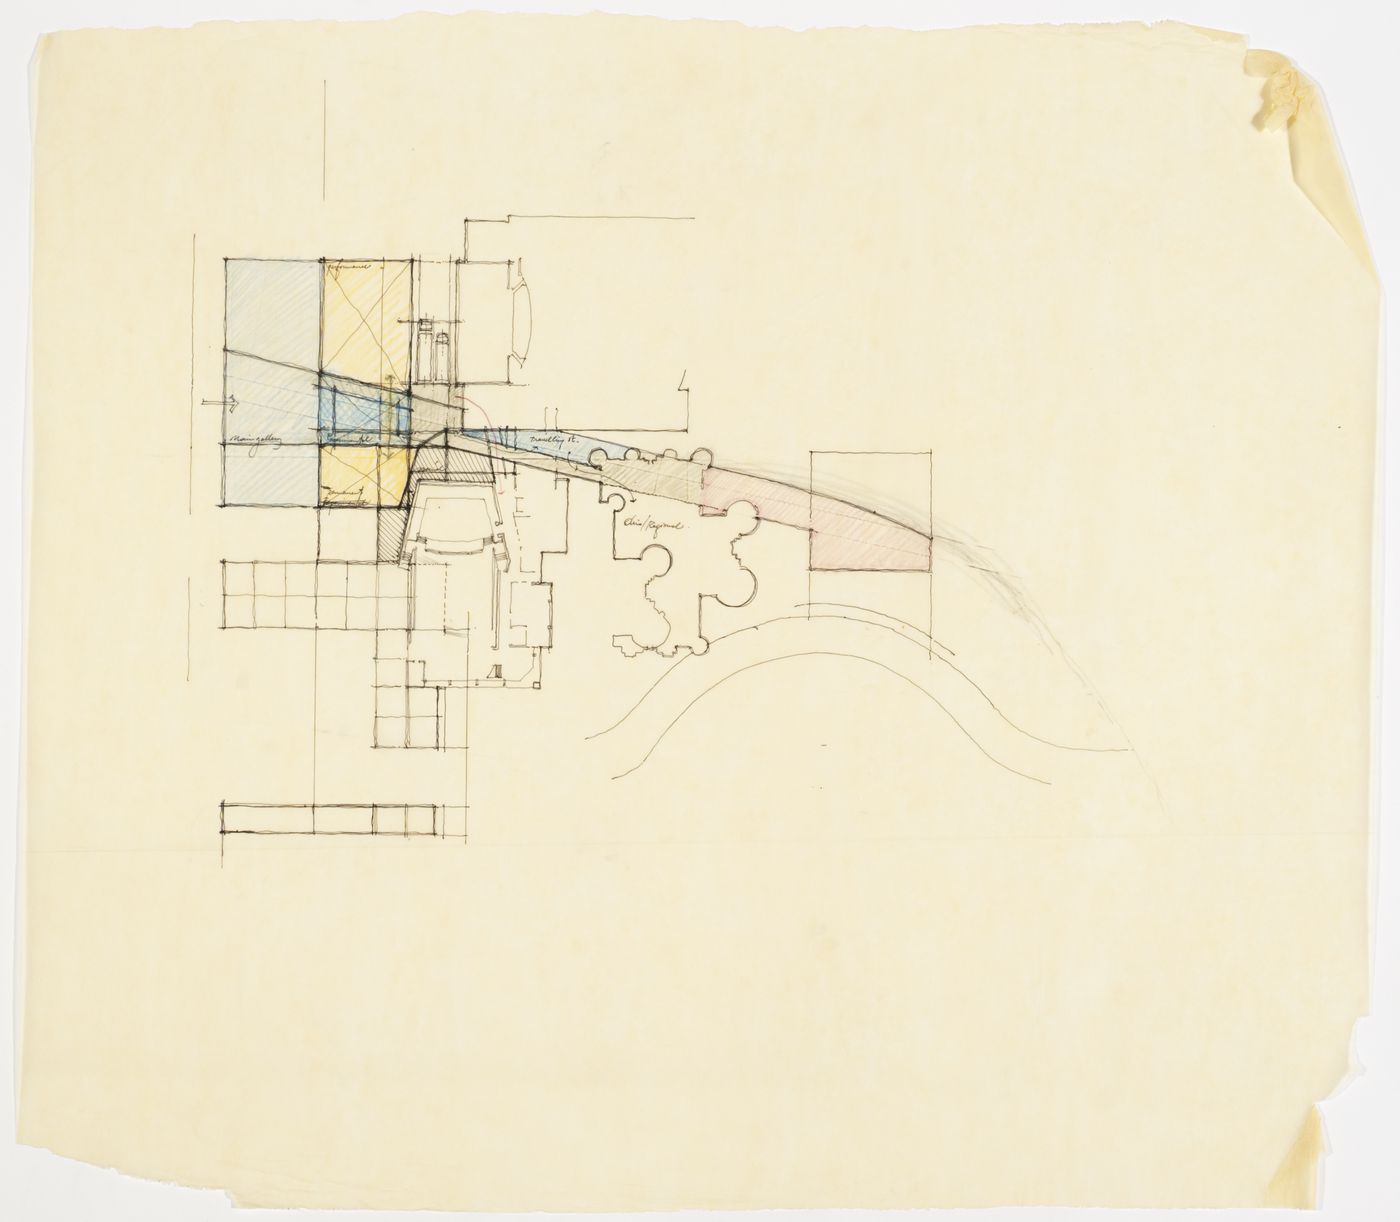 Wexner Center for the Visual Arts, Columbus, Ohio: sketch plan